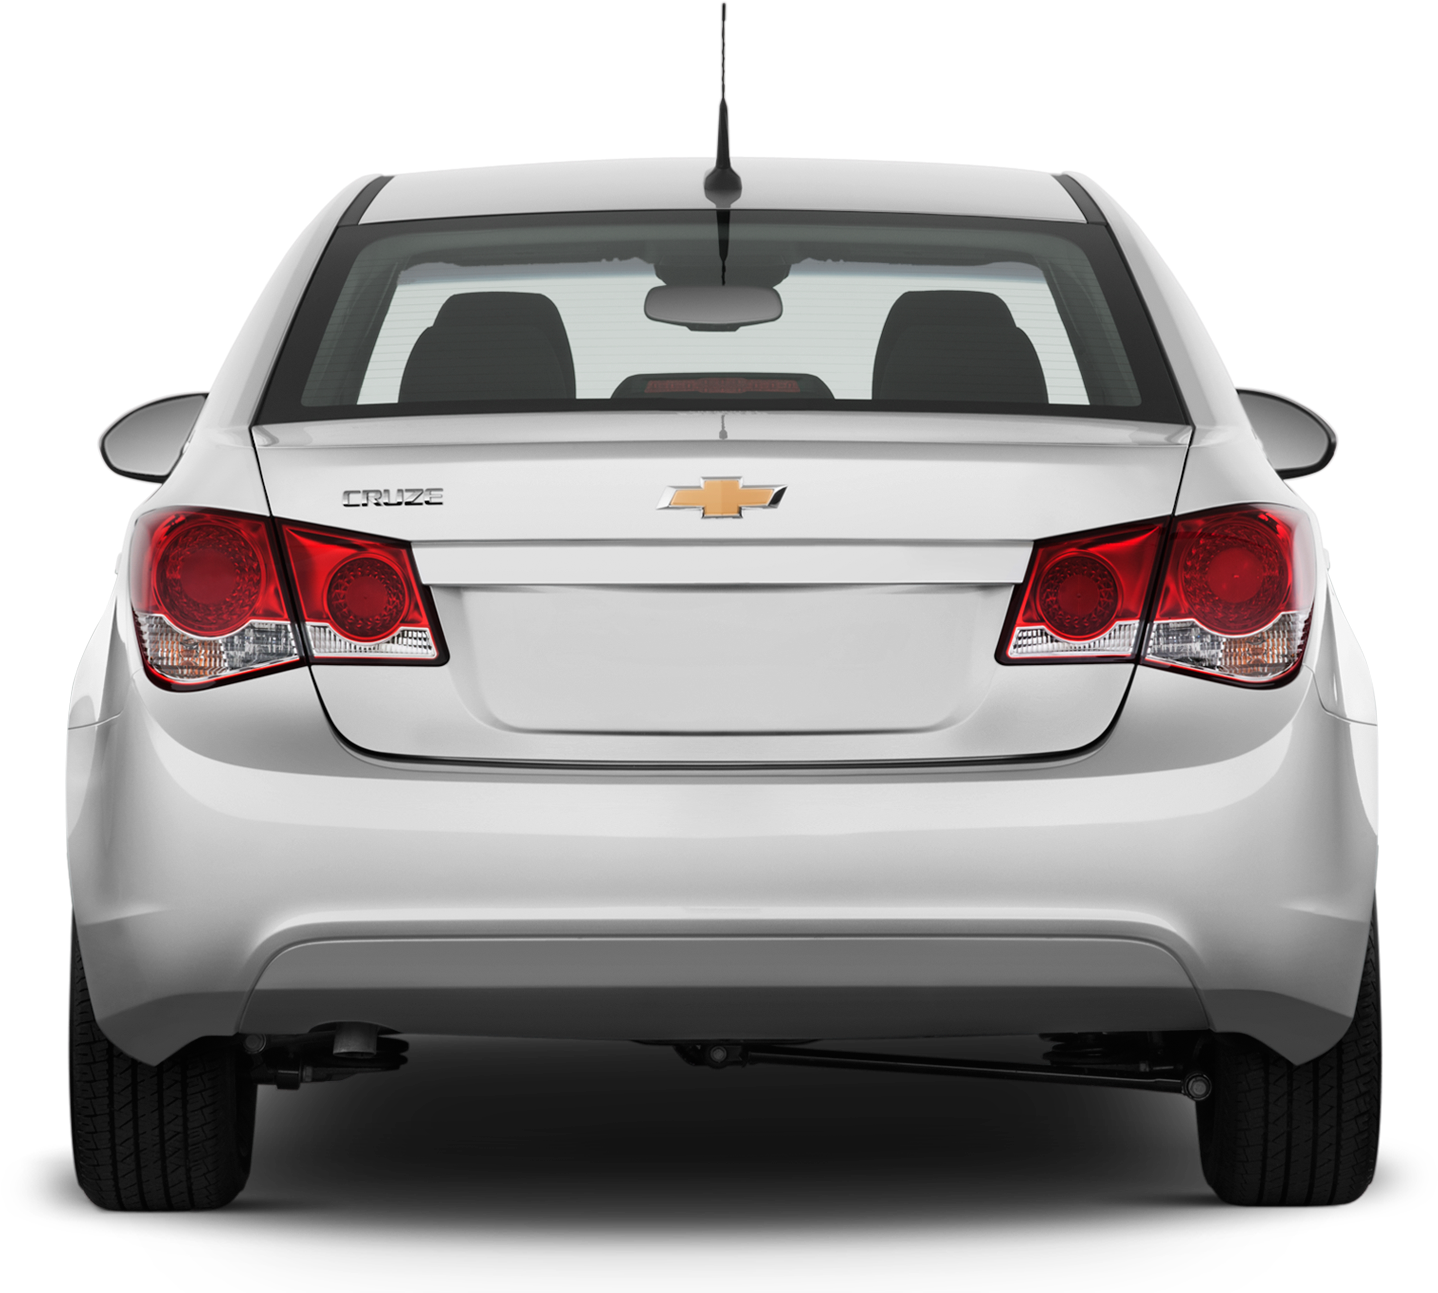 Chevrolet Cruze Rear View PNG